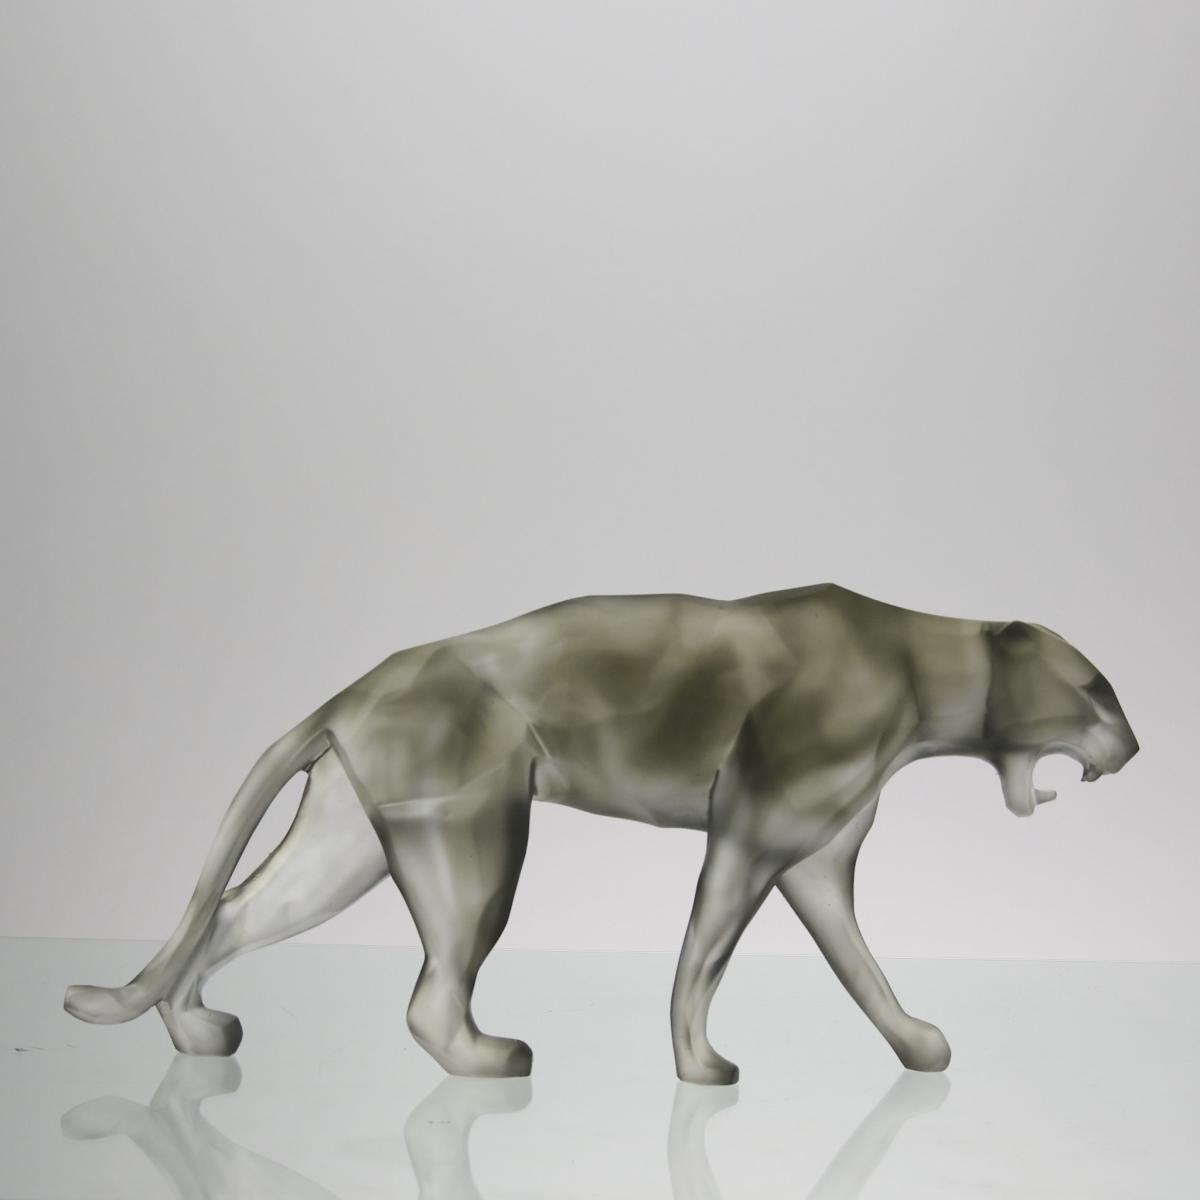 Limited Edition Contemporary Glass Sculpture "Wild Panther" by Richard Orlinski for Daum